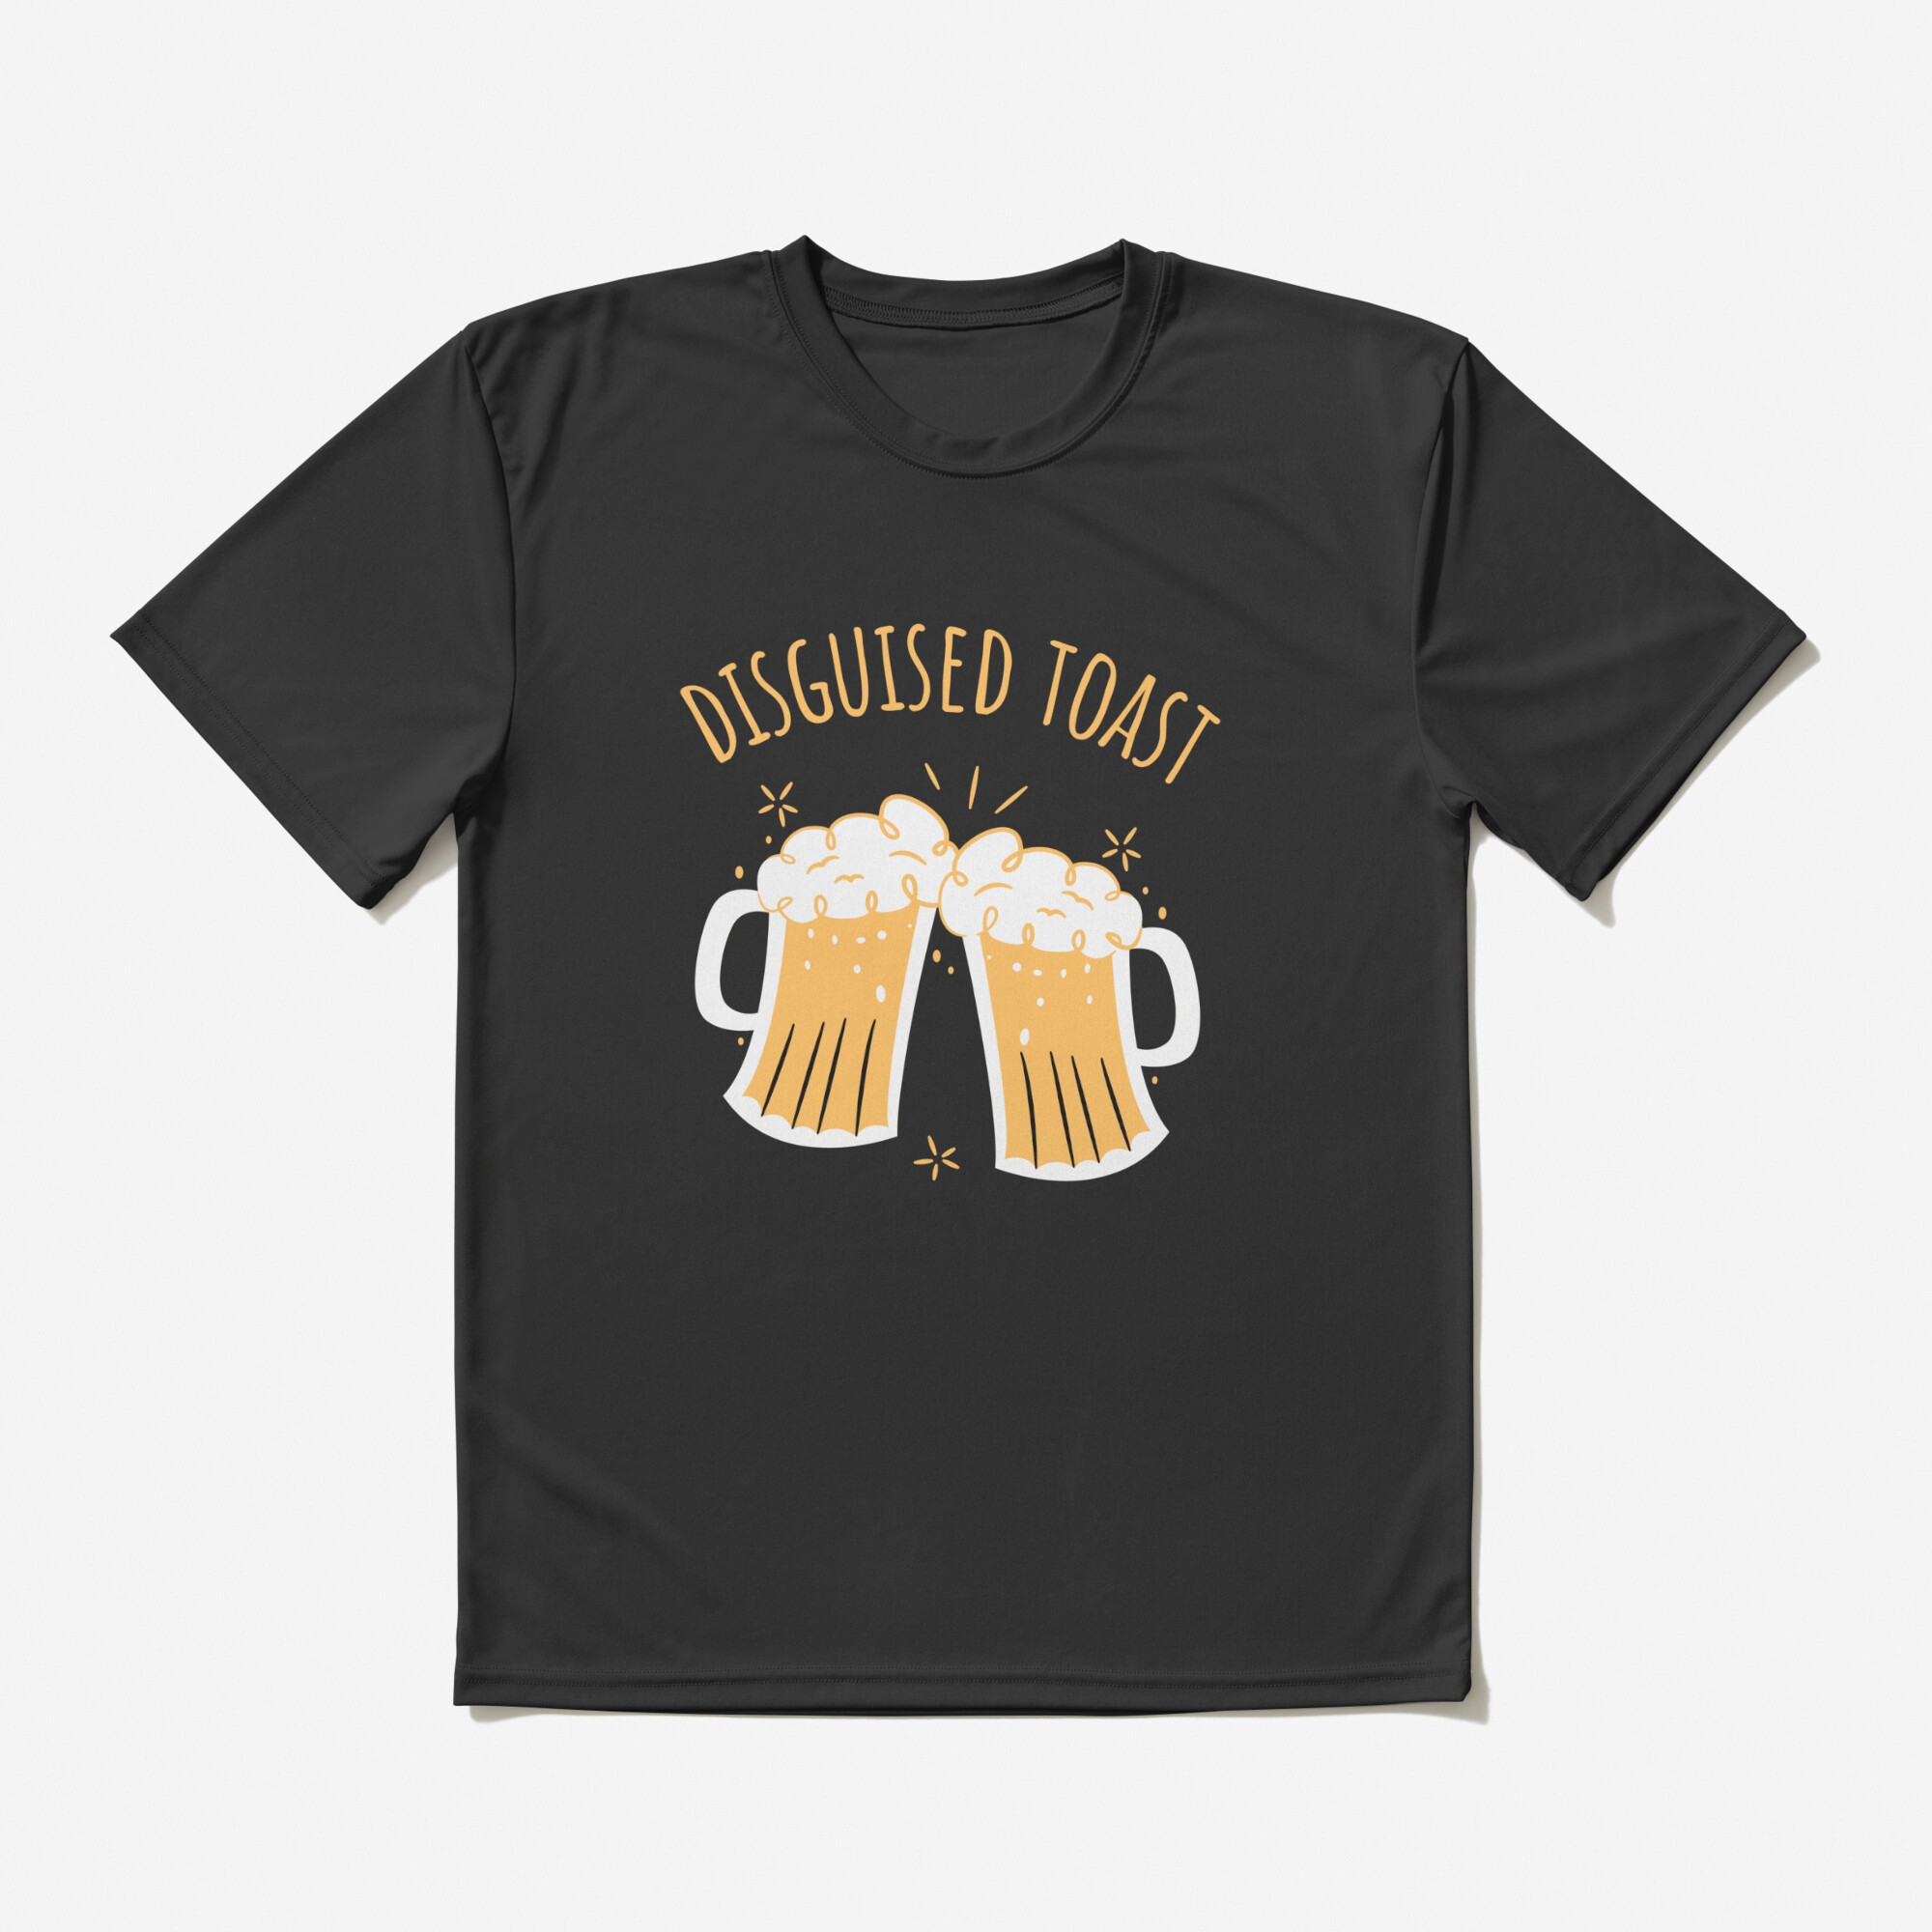 ssrcoactive tshirtflatlay10101001c5ca27c6frontsquare2000x2000 10 - Disguised Toast Shop